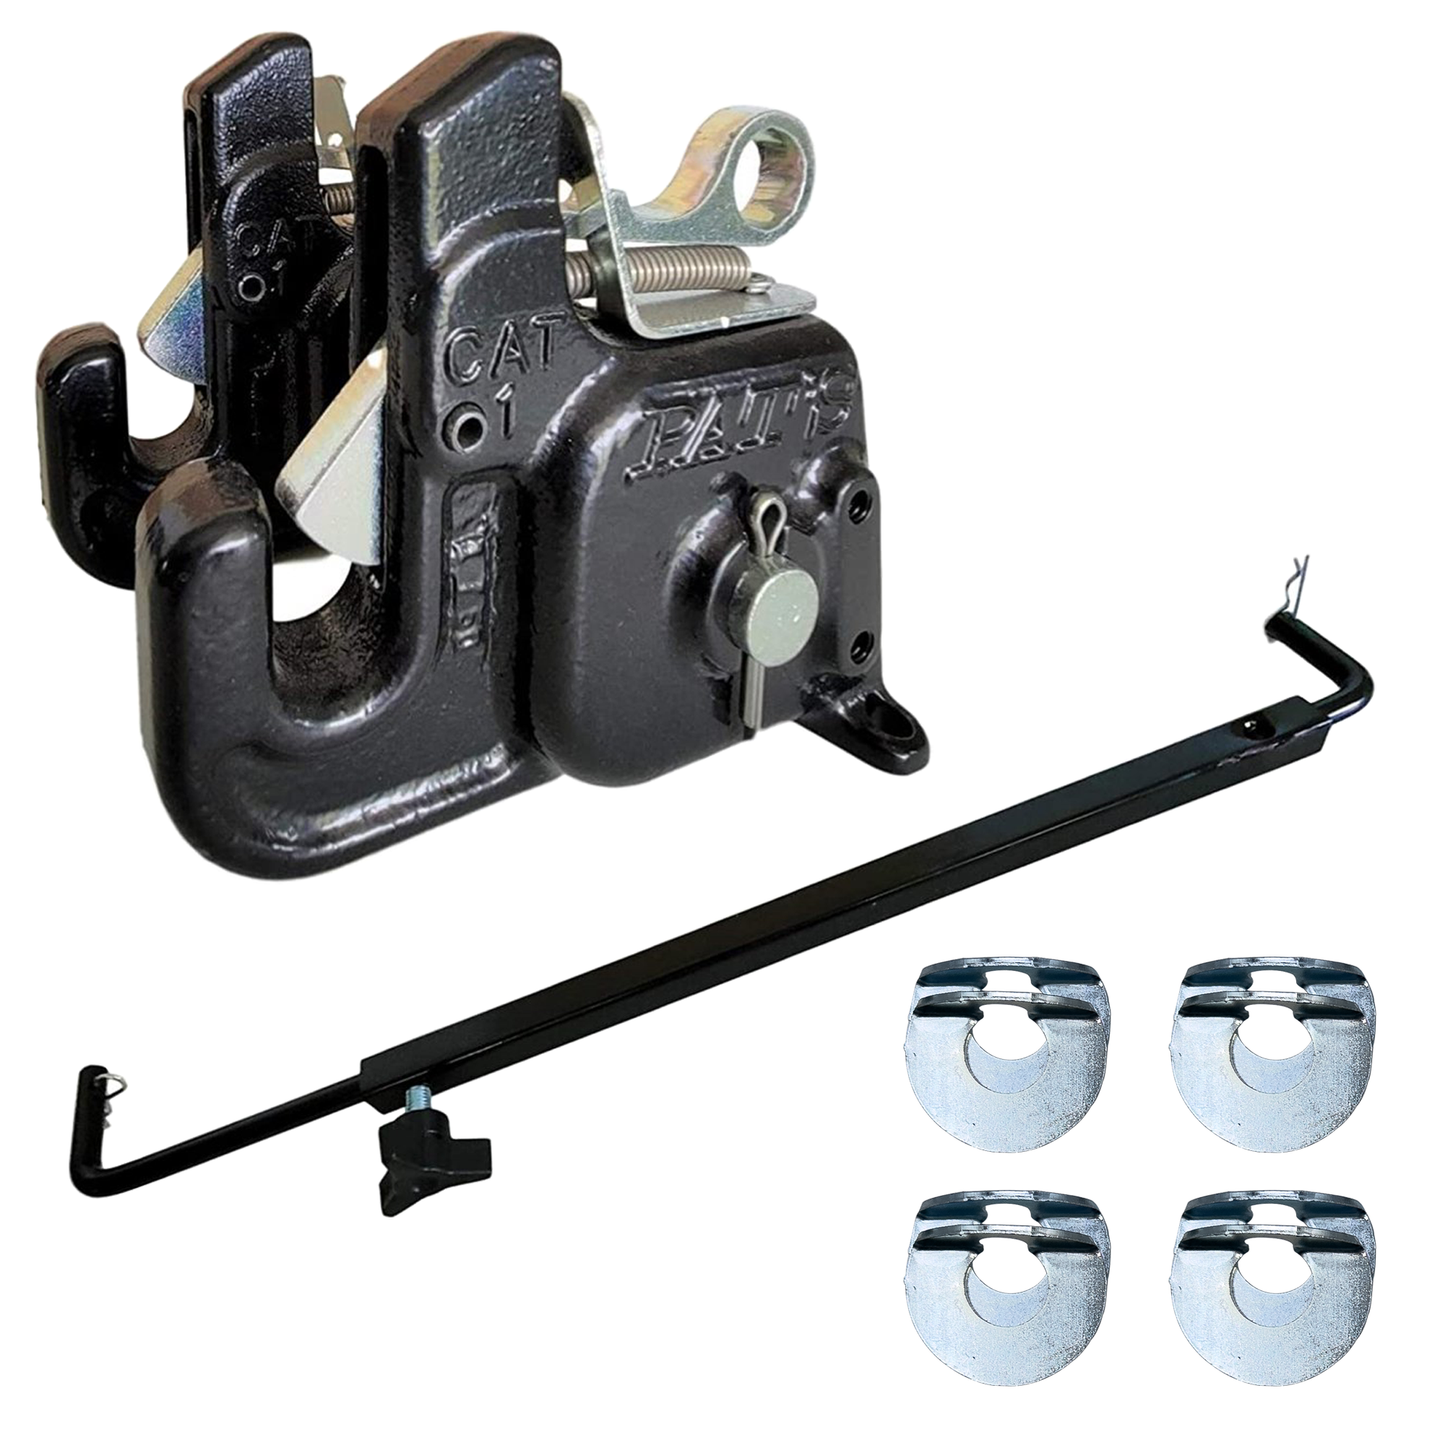 (CAT#1 BLACK) w/ Stabilizer Bar - Comes w/ 4 Pair of Lynch Pin Washers